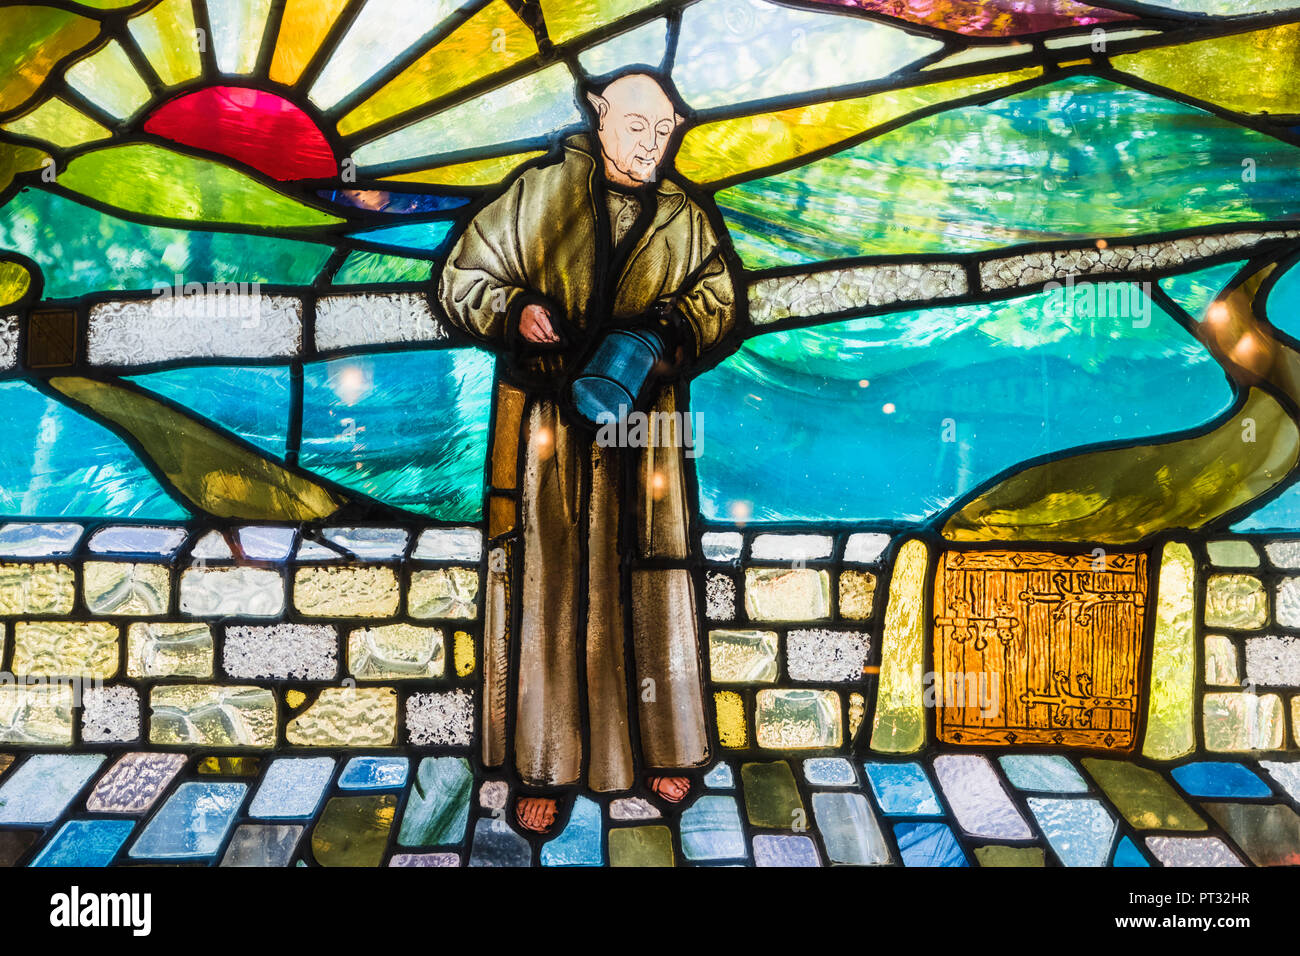 England, London, The City of London, The Black Friar Pub, Art Nouveau Stained Glass Window depicting Monk Holding Beer Tankard Stock Photo